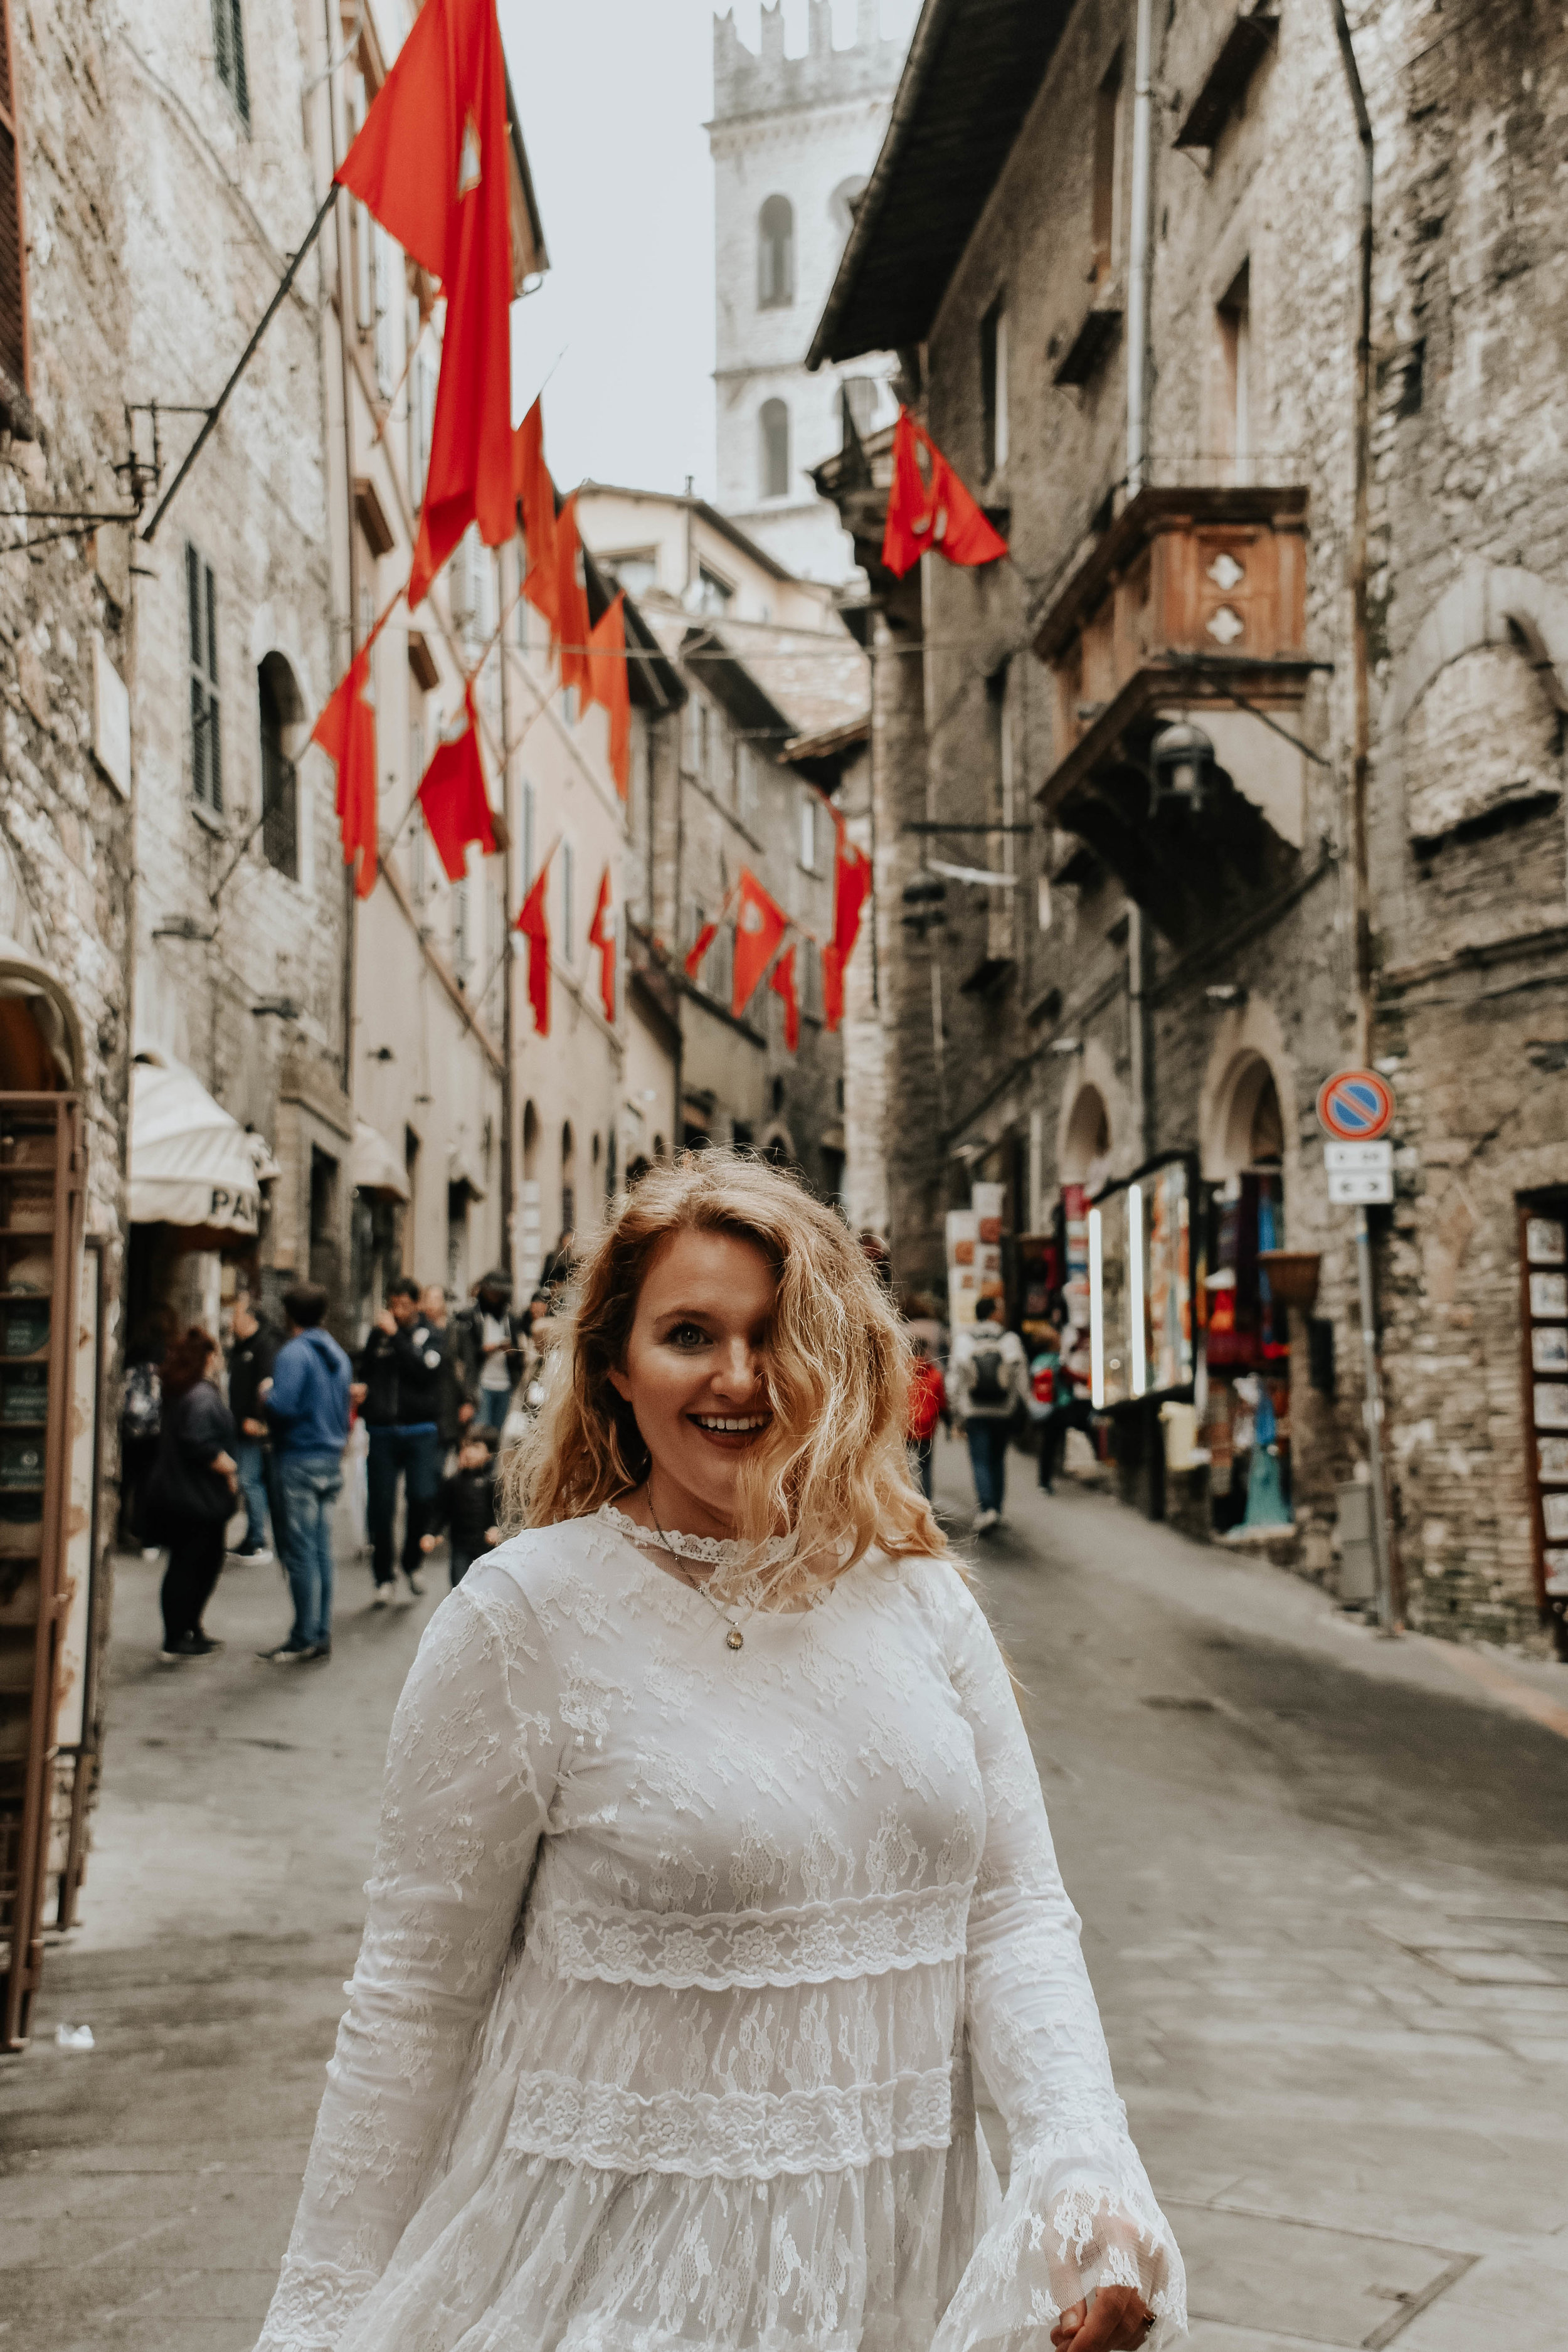 Helene in Assisi, Italy